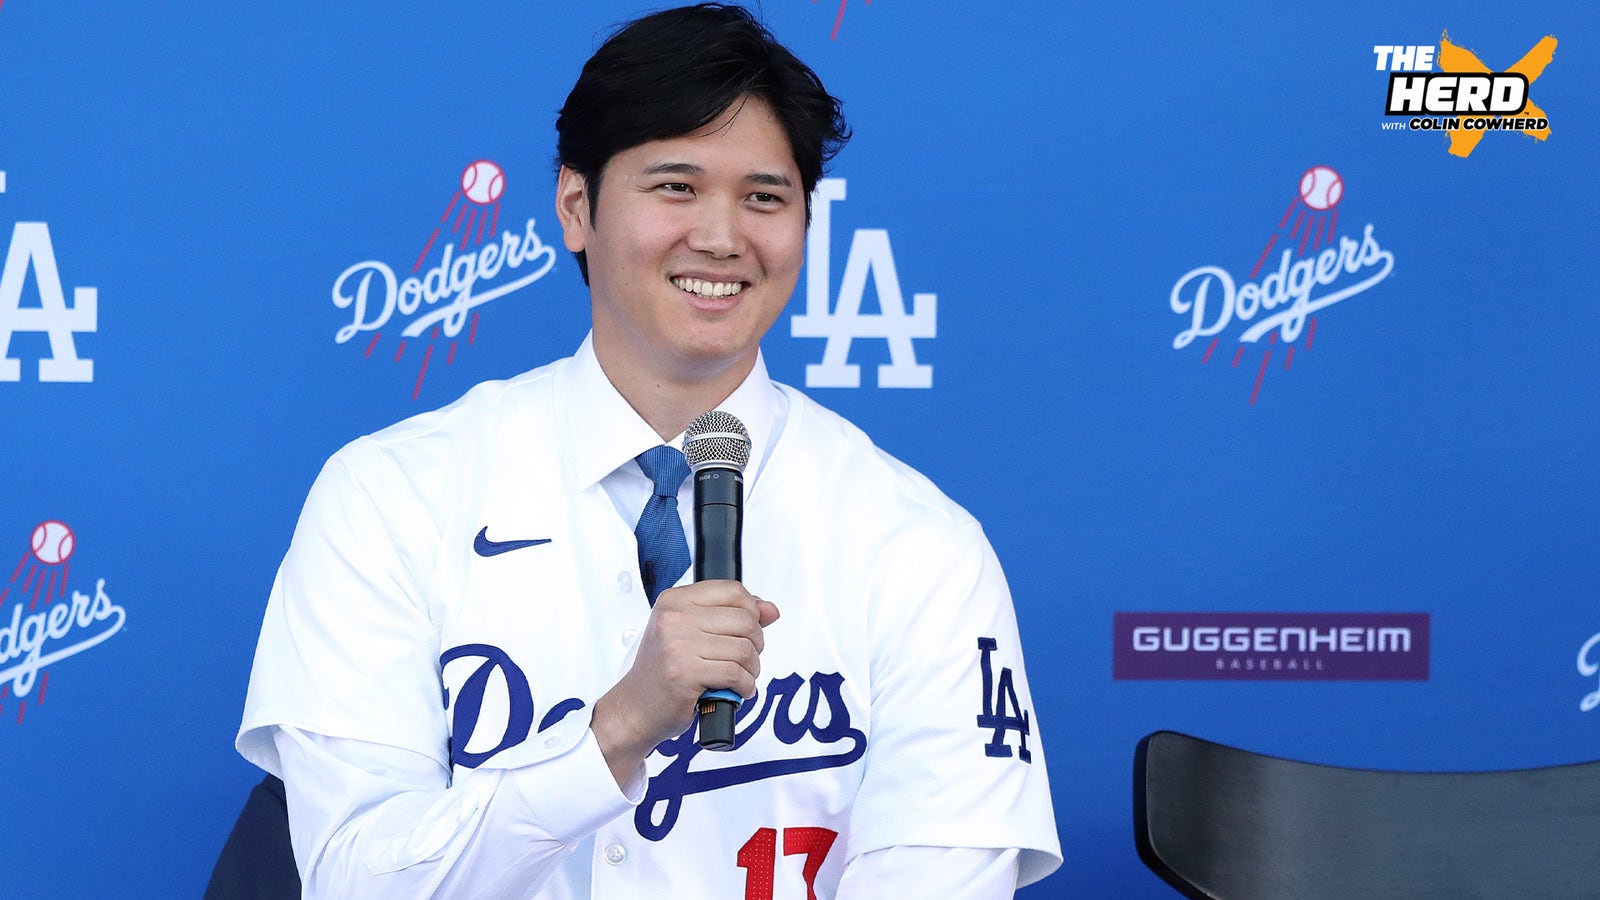 Will the Dodgers win a World Series with Shohei Ohtani?